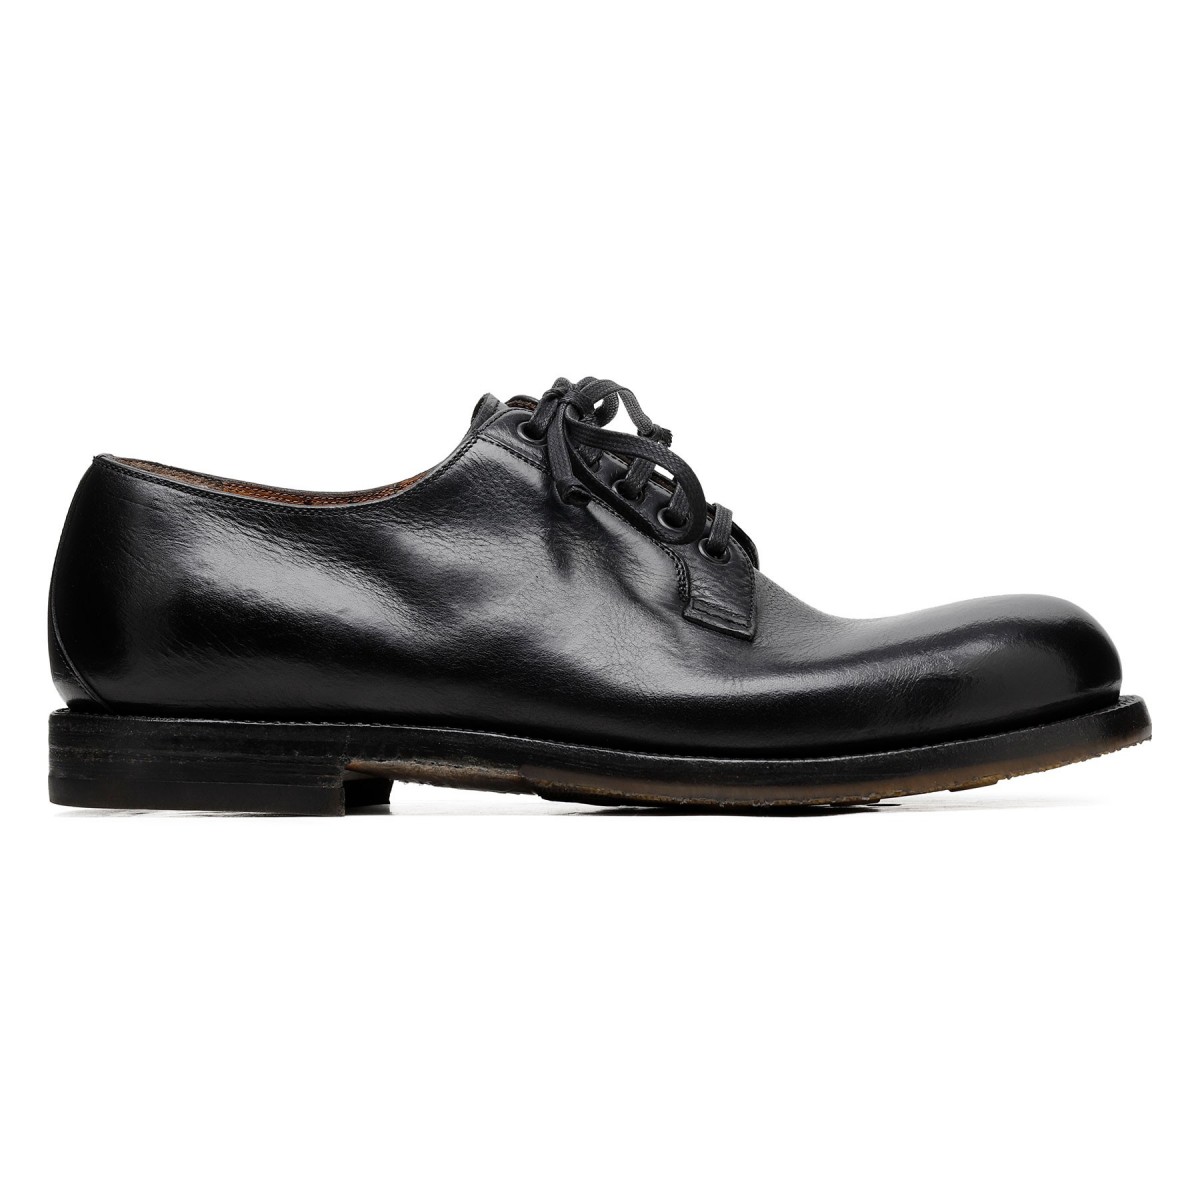 Black leather Derby Shoes